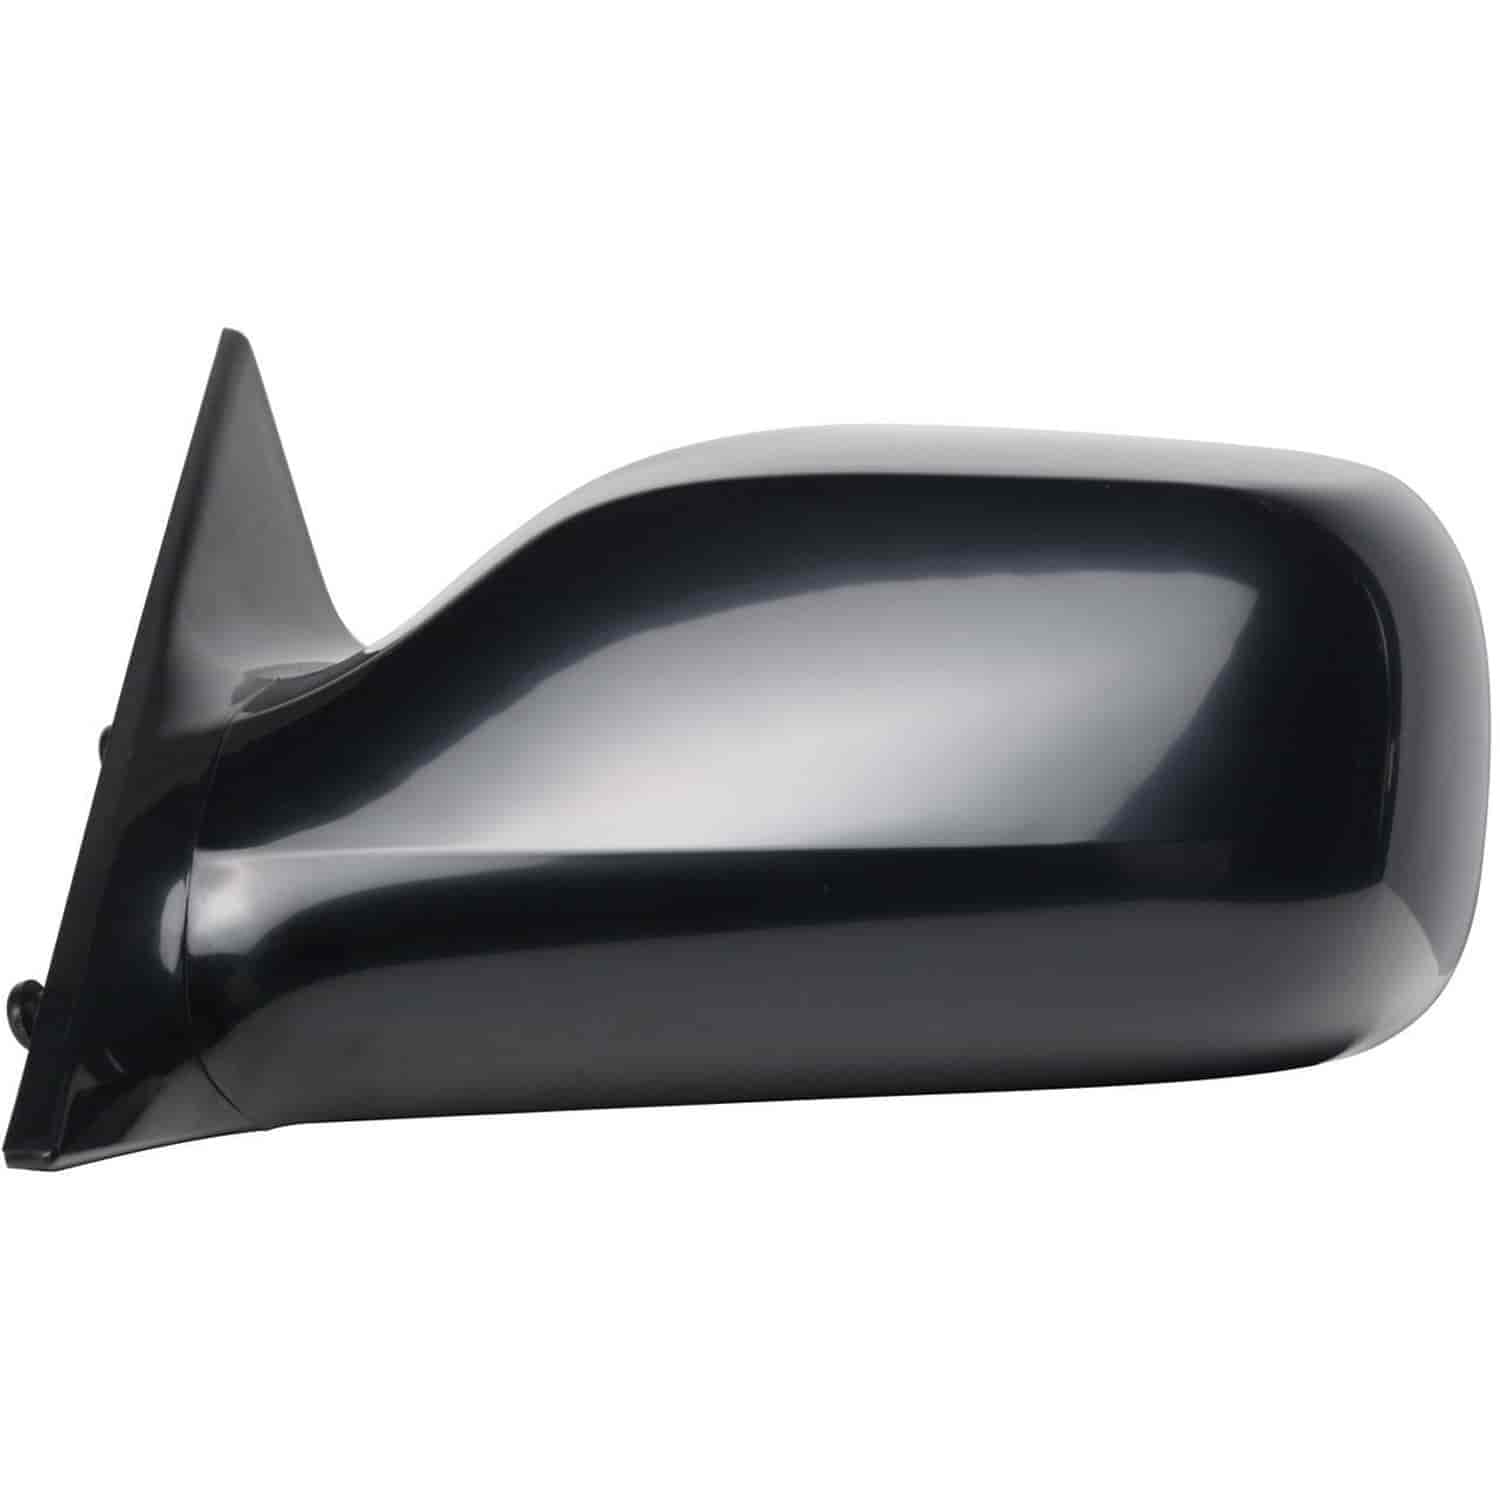 OEM Style Replacement mirror for 05-10 Toyota Avalon touring XL Model driver side mirror tested to f